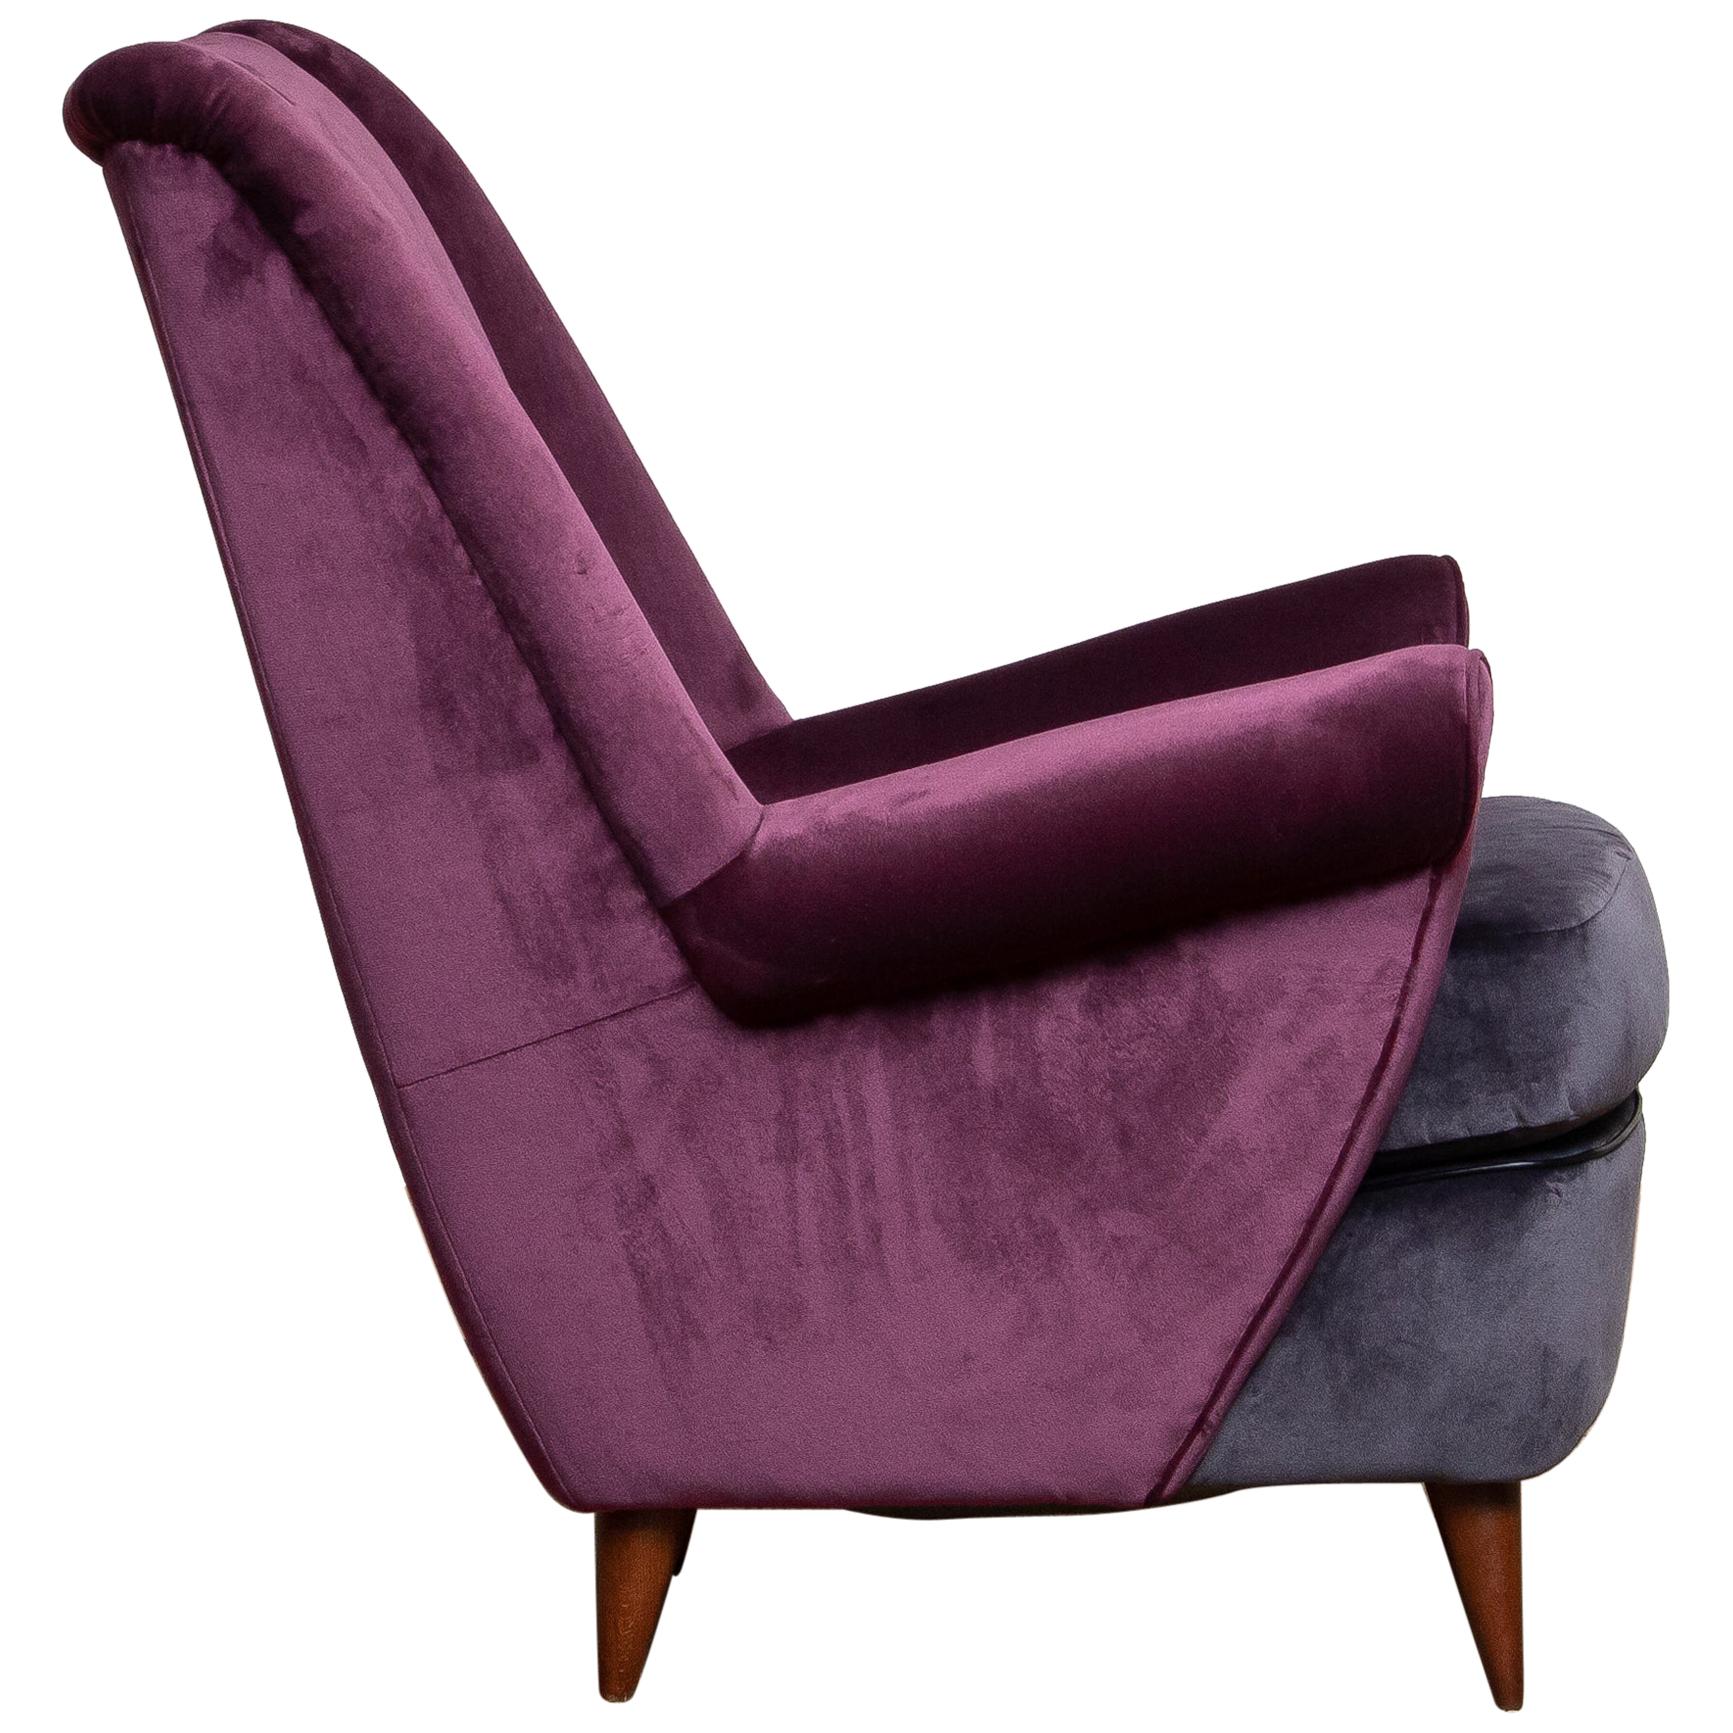 Absolutely beautiful 1950's lounge / easy chair designed by Gio Ponti and made by ISA in Bergamo in Italy. The fabulous color combination and choice of fabric, magenta and dark gray, makes this chair a real eye catcher. This chairs are completely